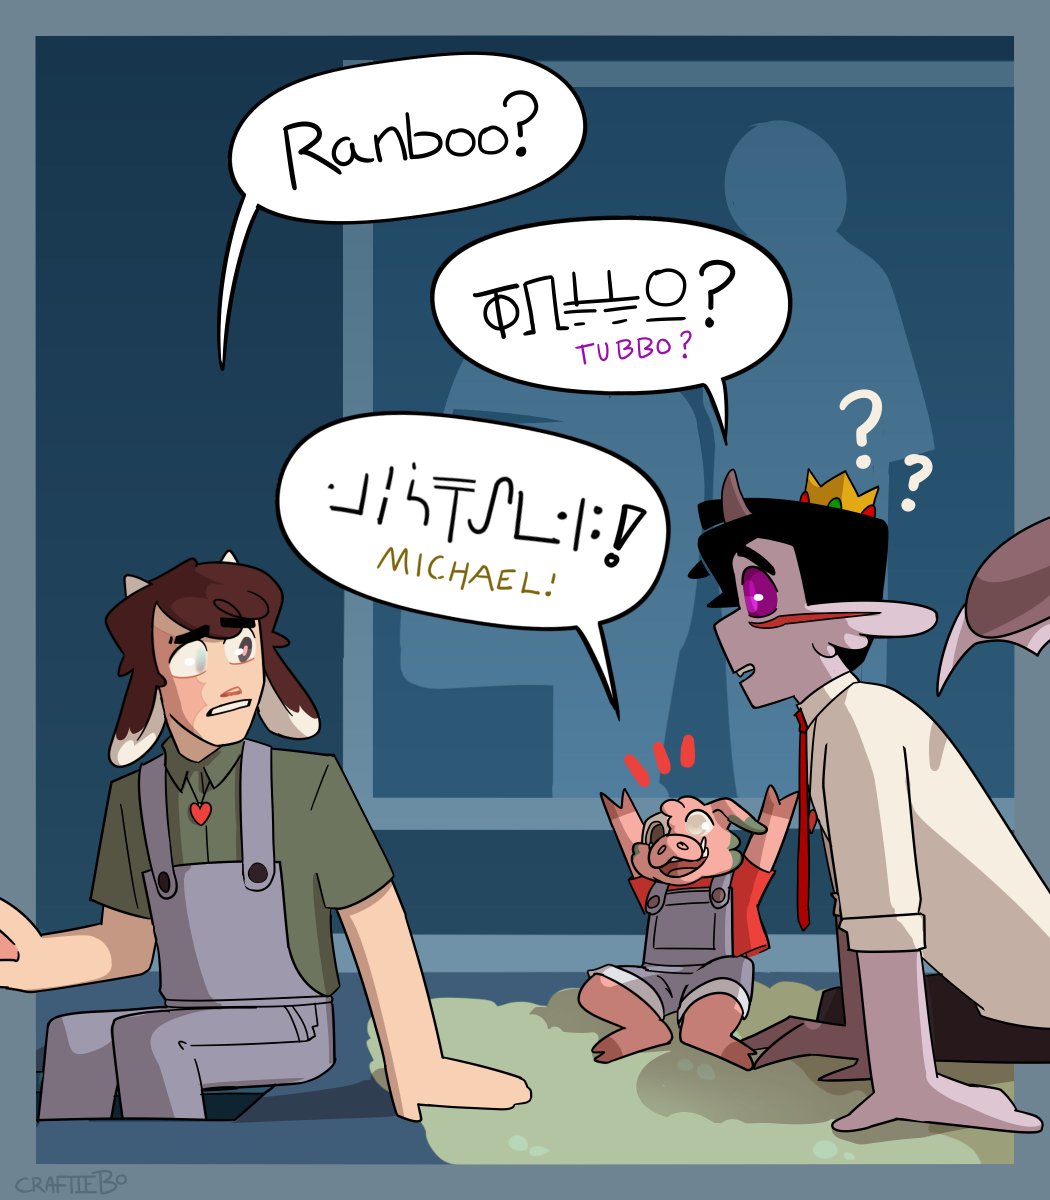 #ranboofanart #tubbofanart 

(consider: enderwalking ranboo Also has no idea what michael is saying. he just sounds excited. this family is a mess) 